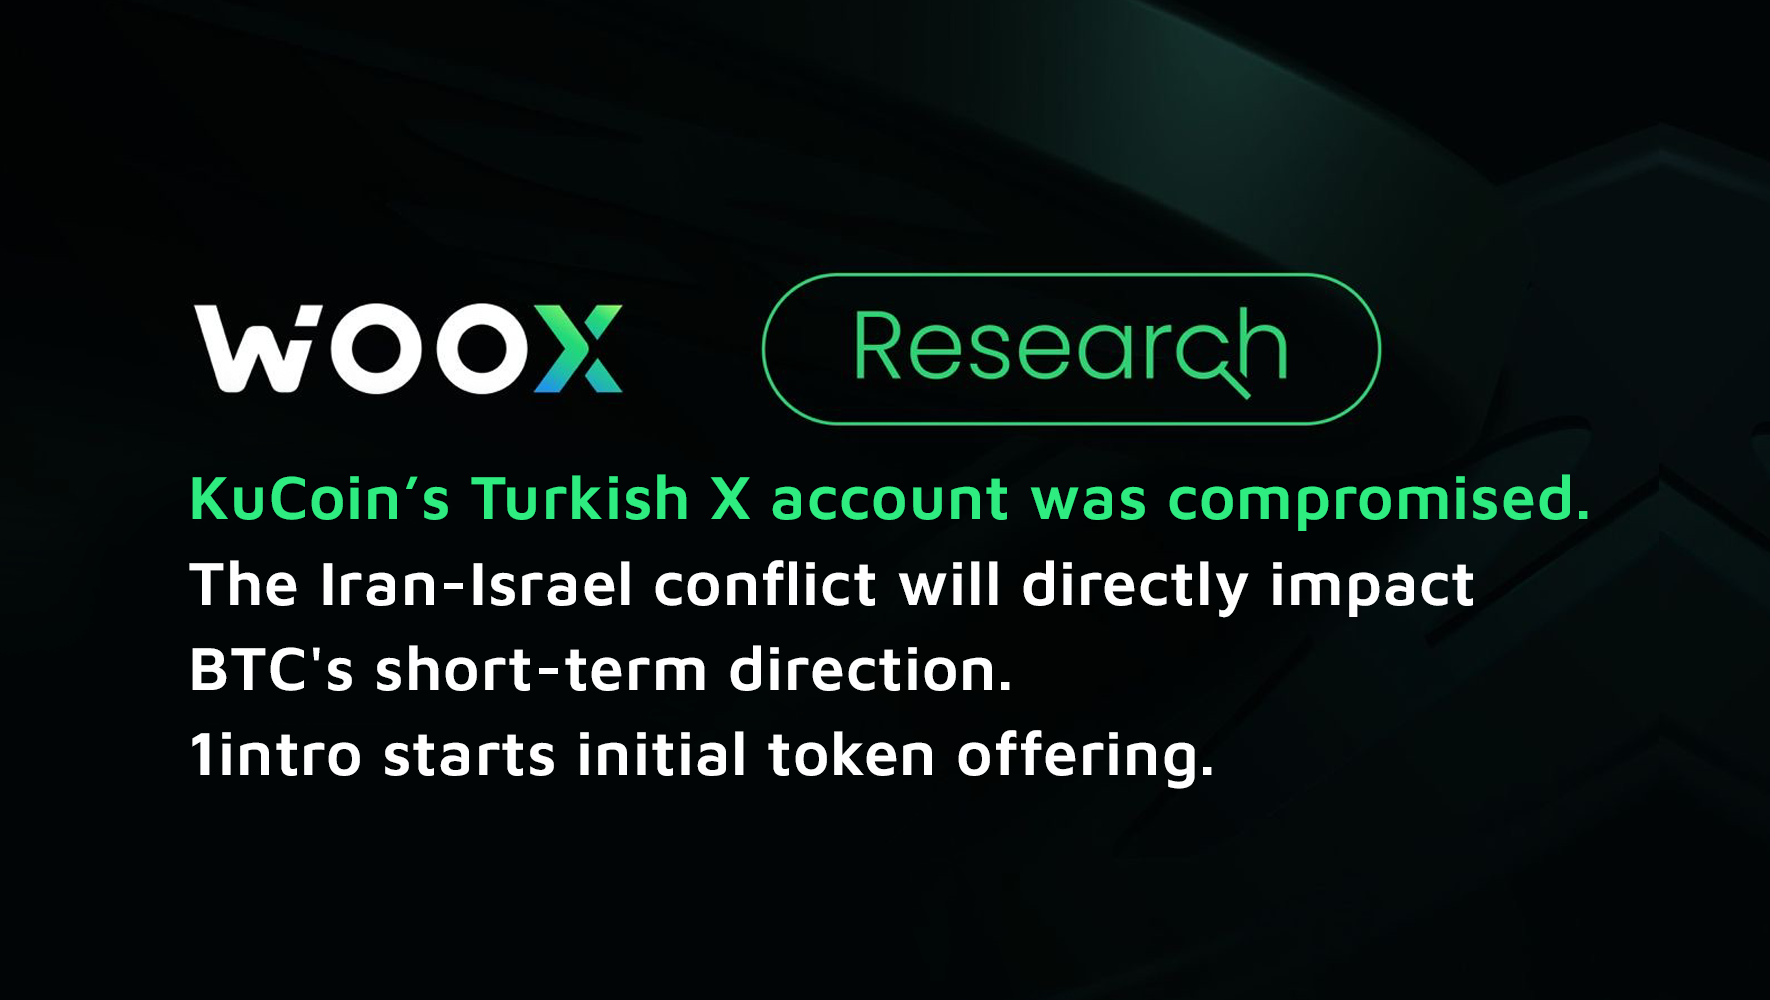 KuCoin’s Turkish X account was compromised